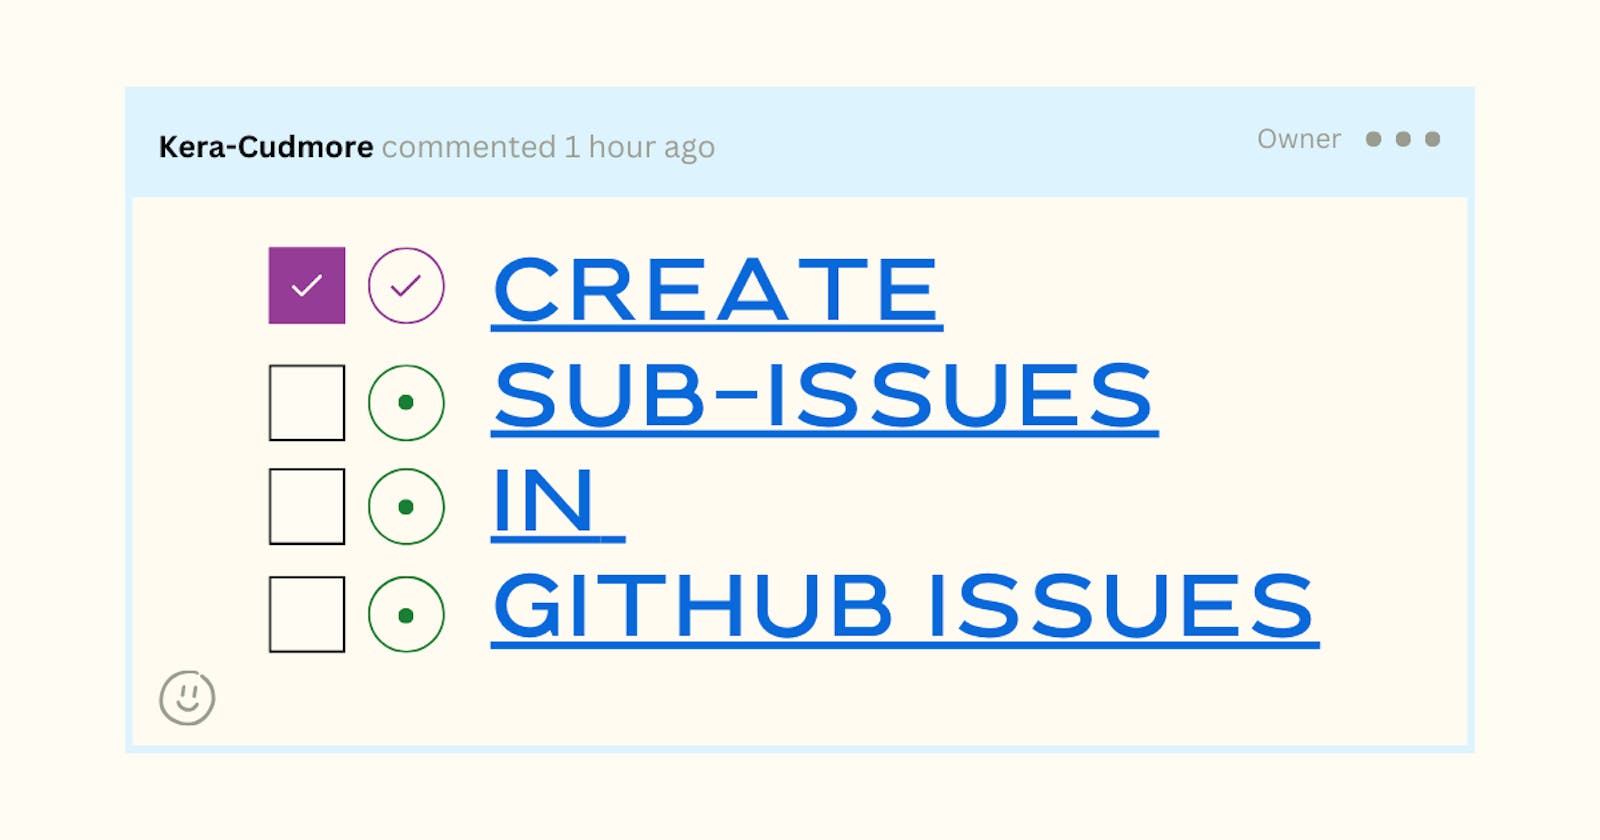 Create sub-issues in GitHub issues